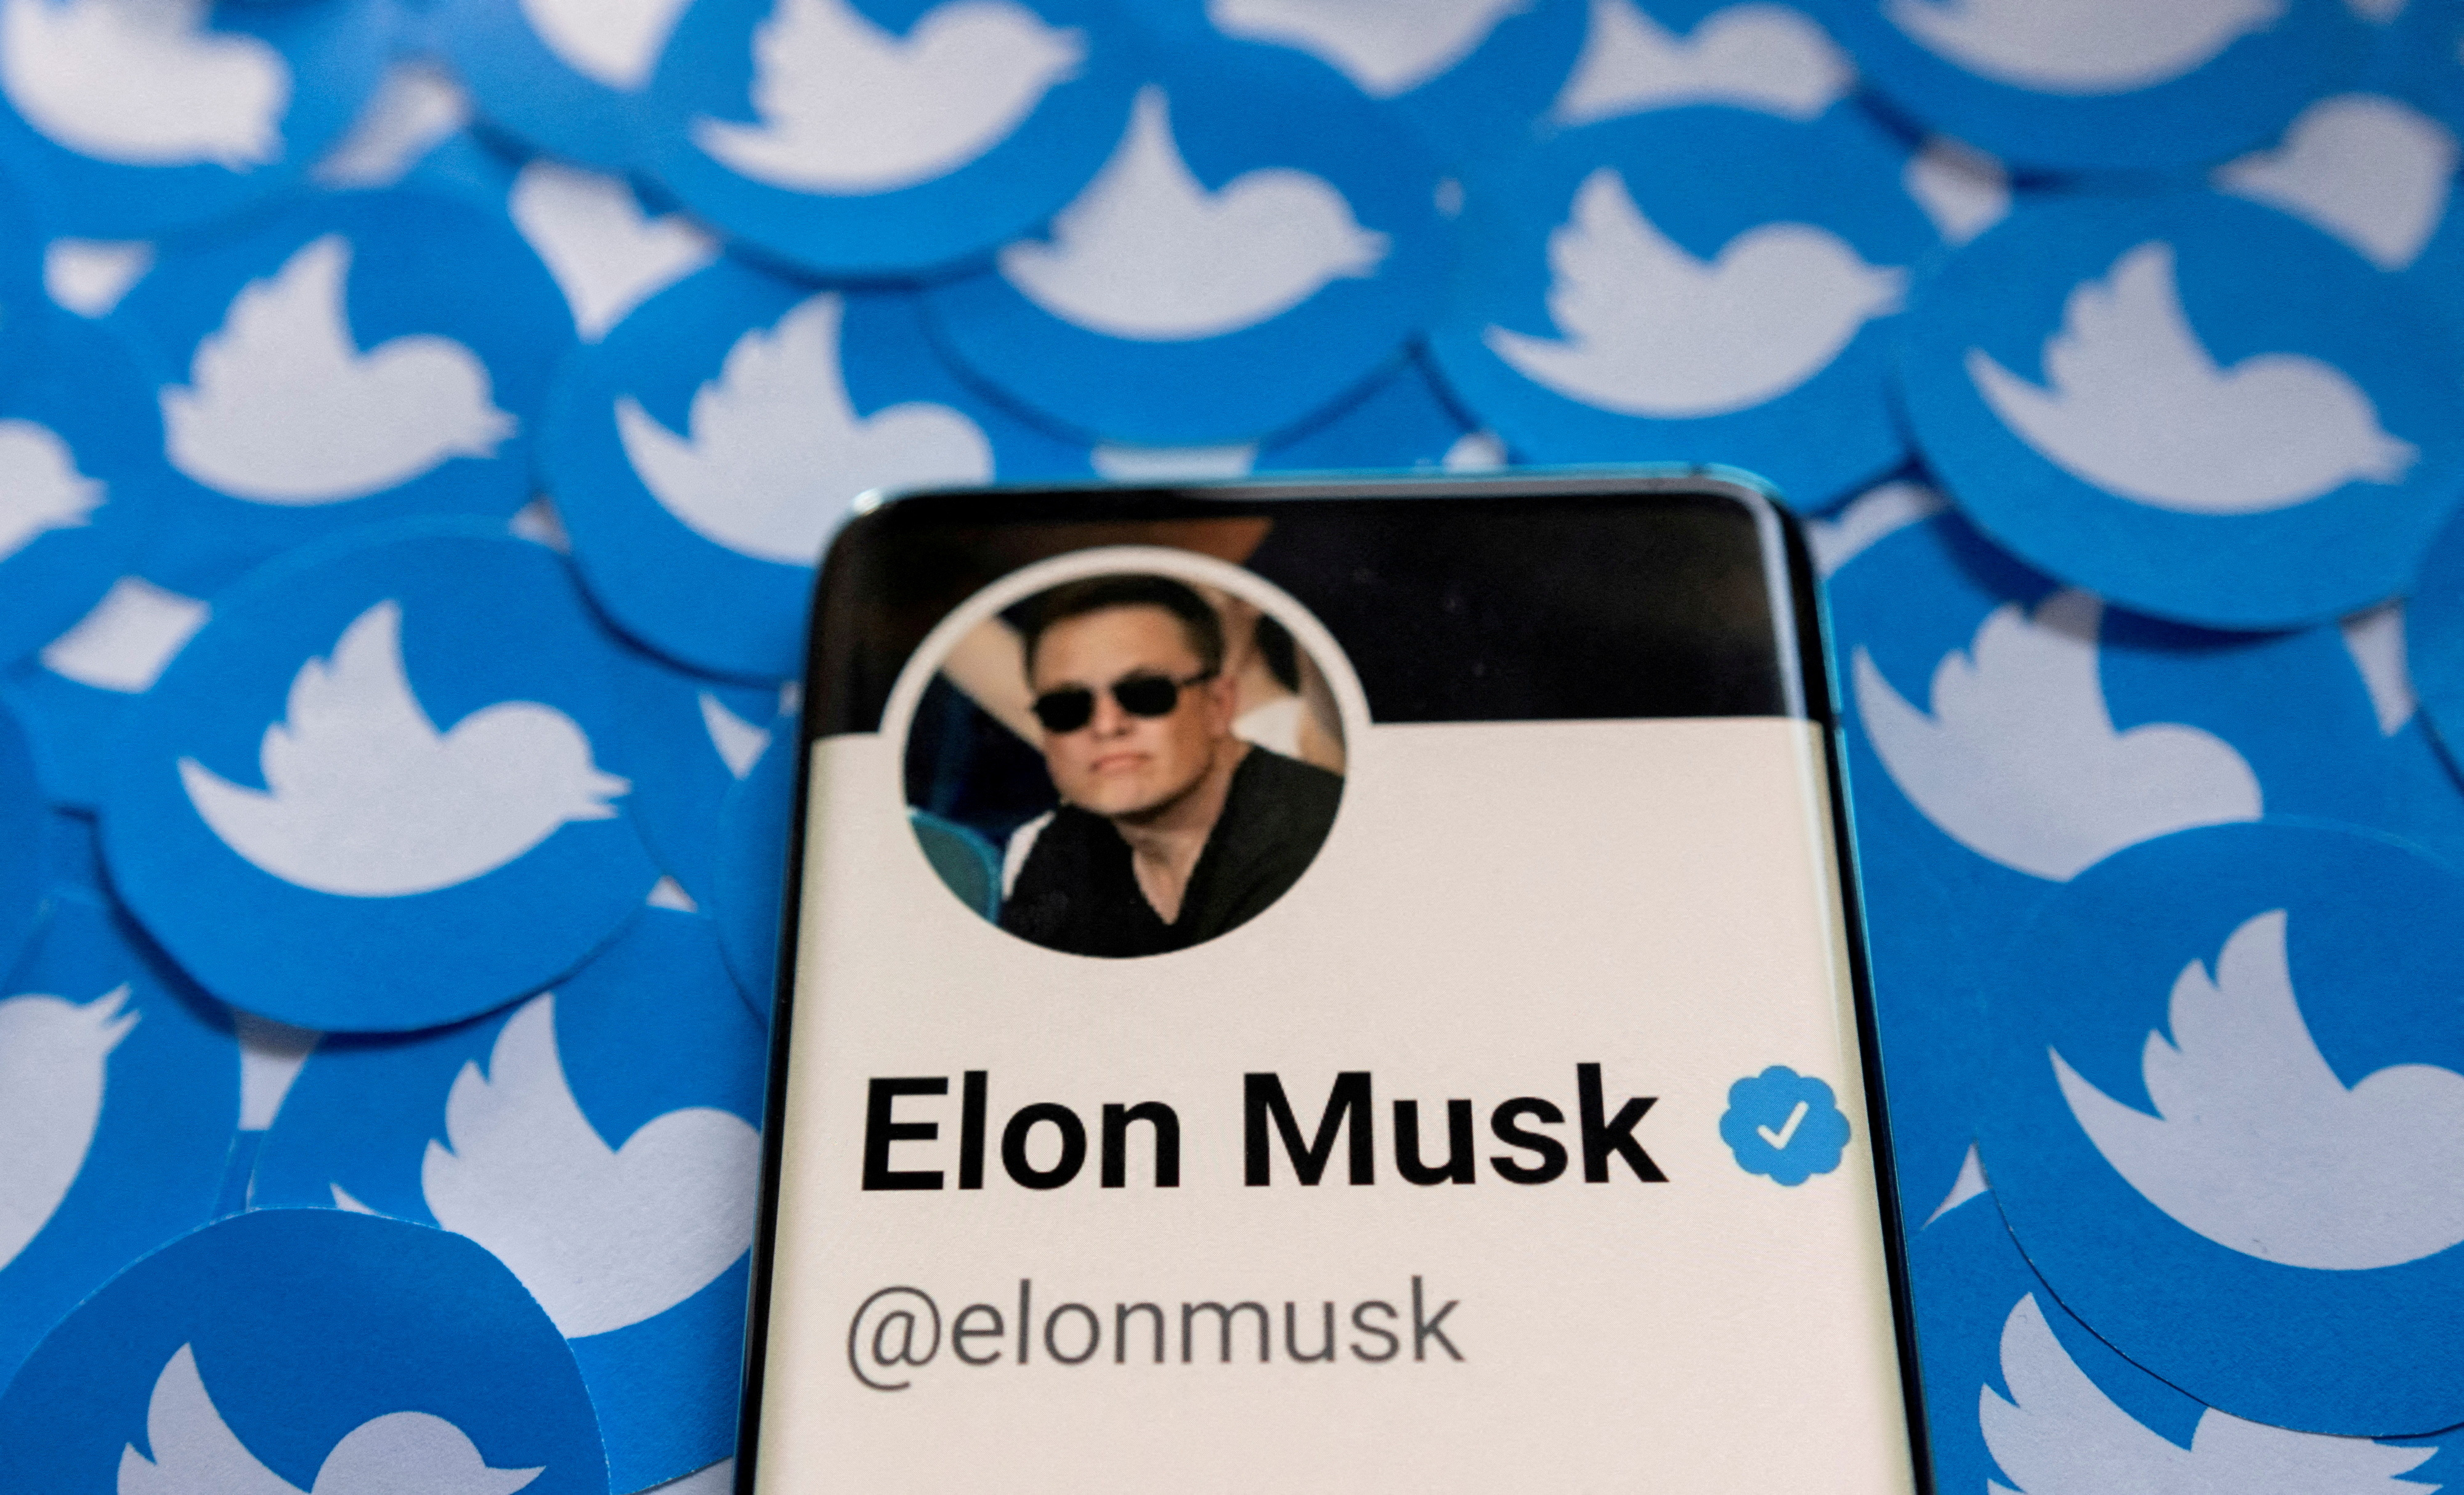 FILE PHOTO: Elon Musk's Twitter profile is seen on a smartphone placed over a printed Twitter logo in this April 28, 2022 photo caption.  REUTERS/Dado Ruvic/Illustration/File Photo